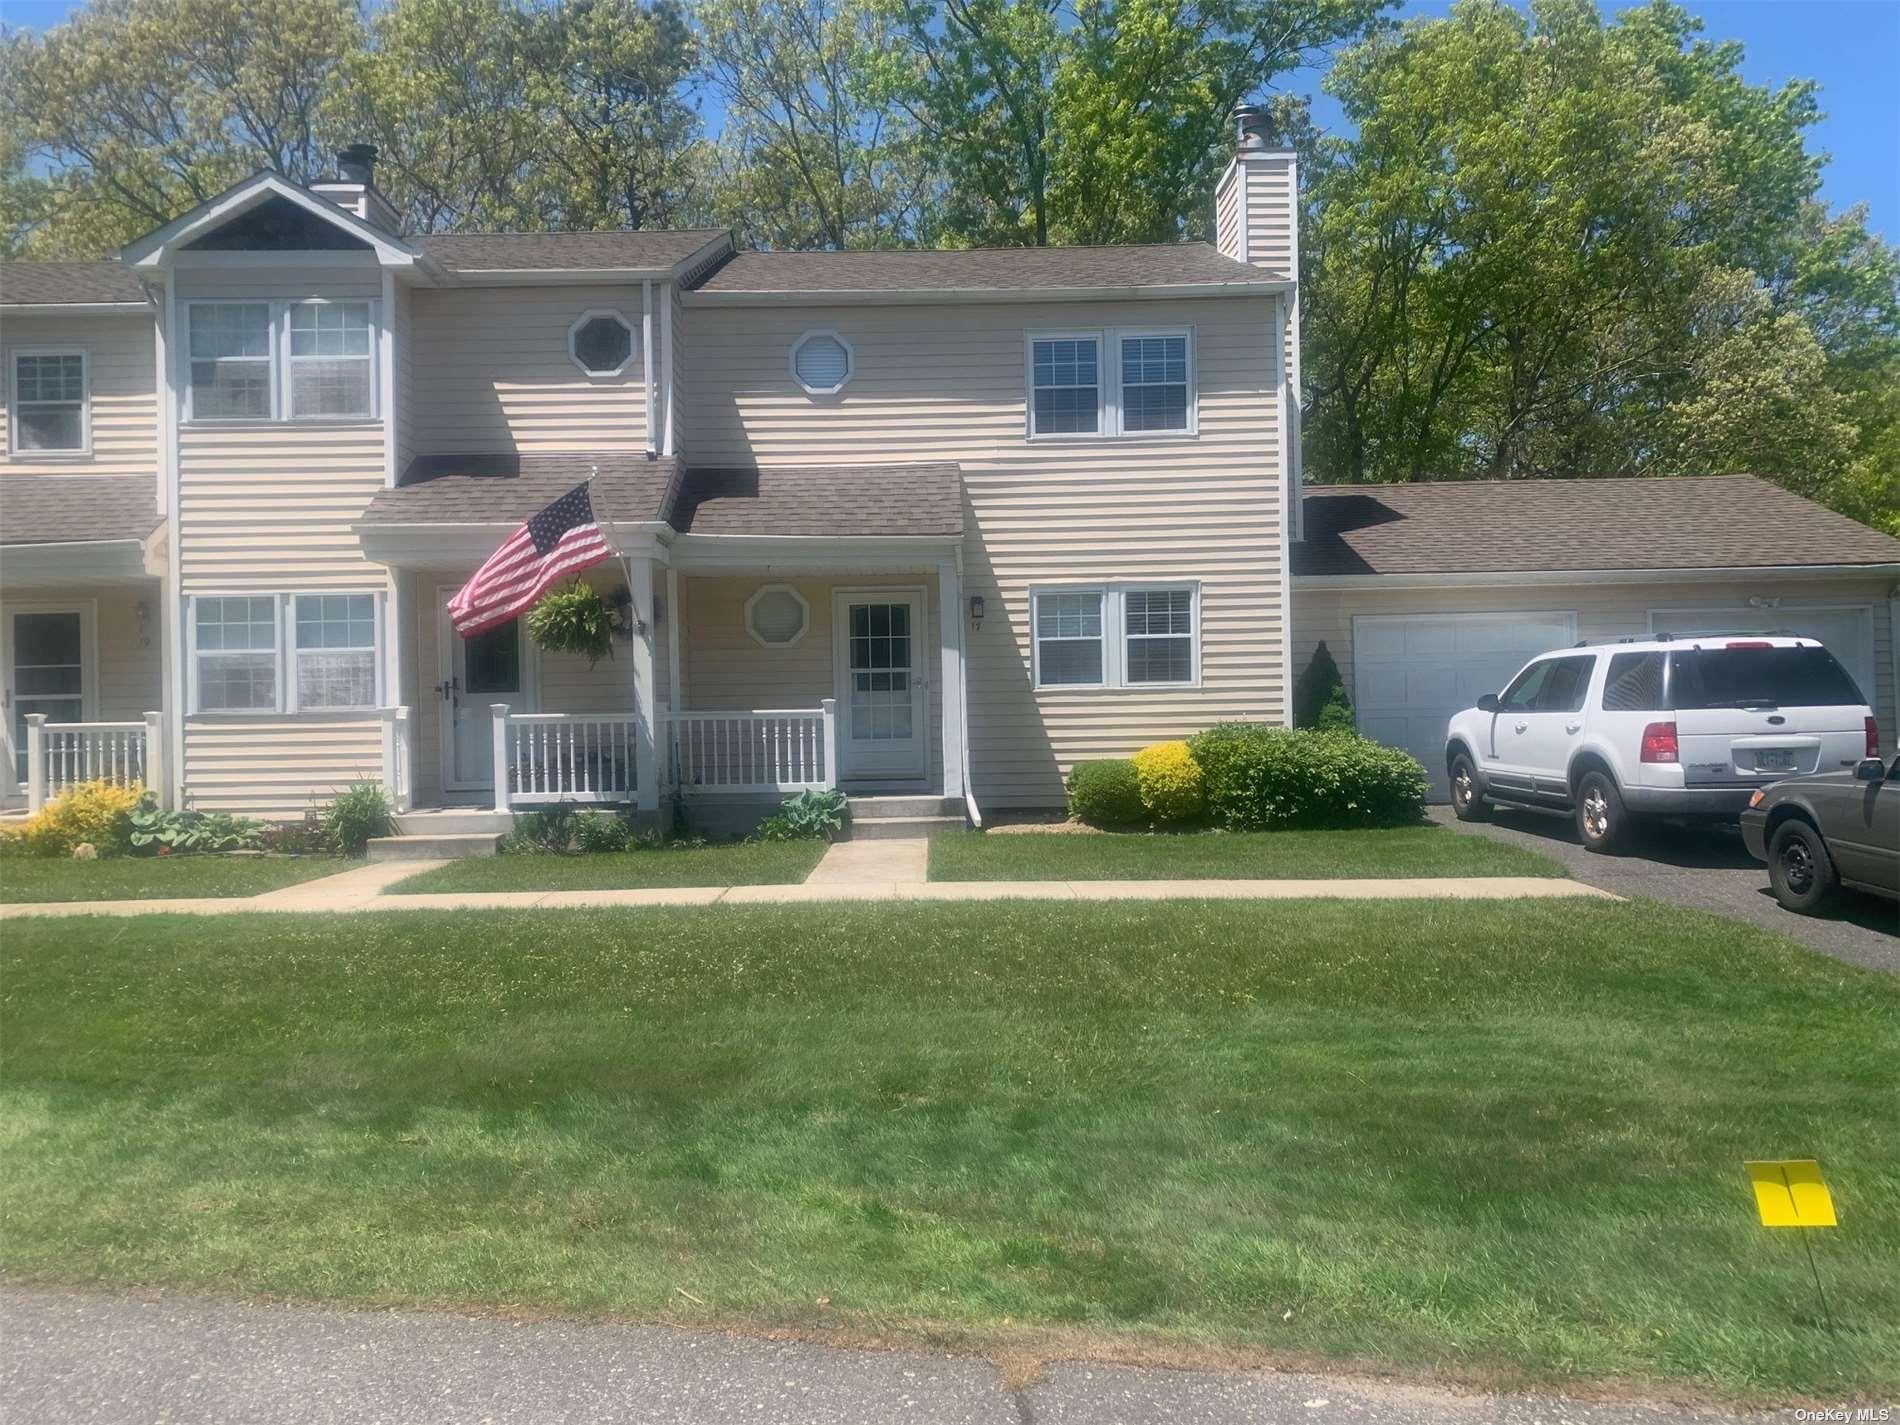 17 Franklin Commons #17 in Long Island, Yaphank, NY 11980